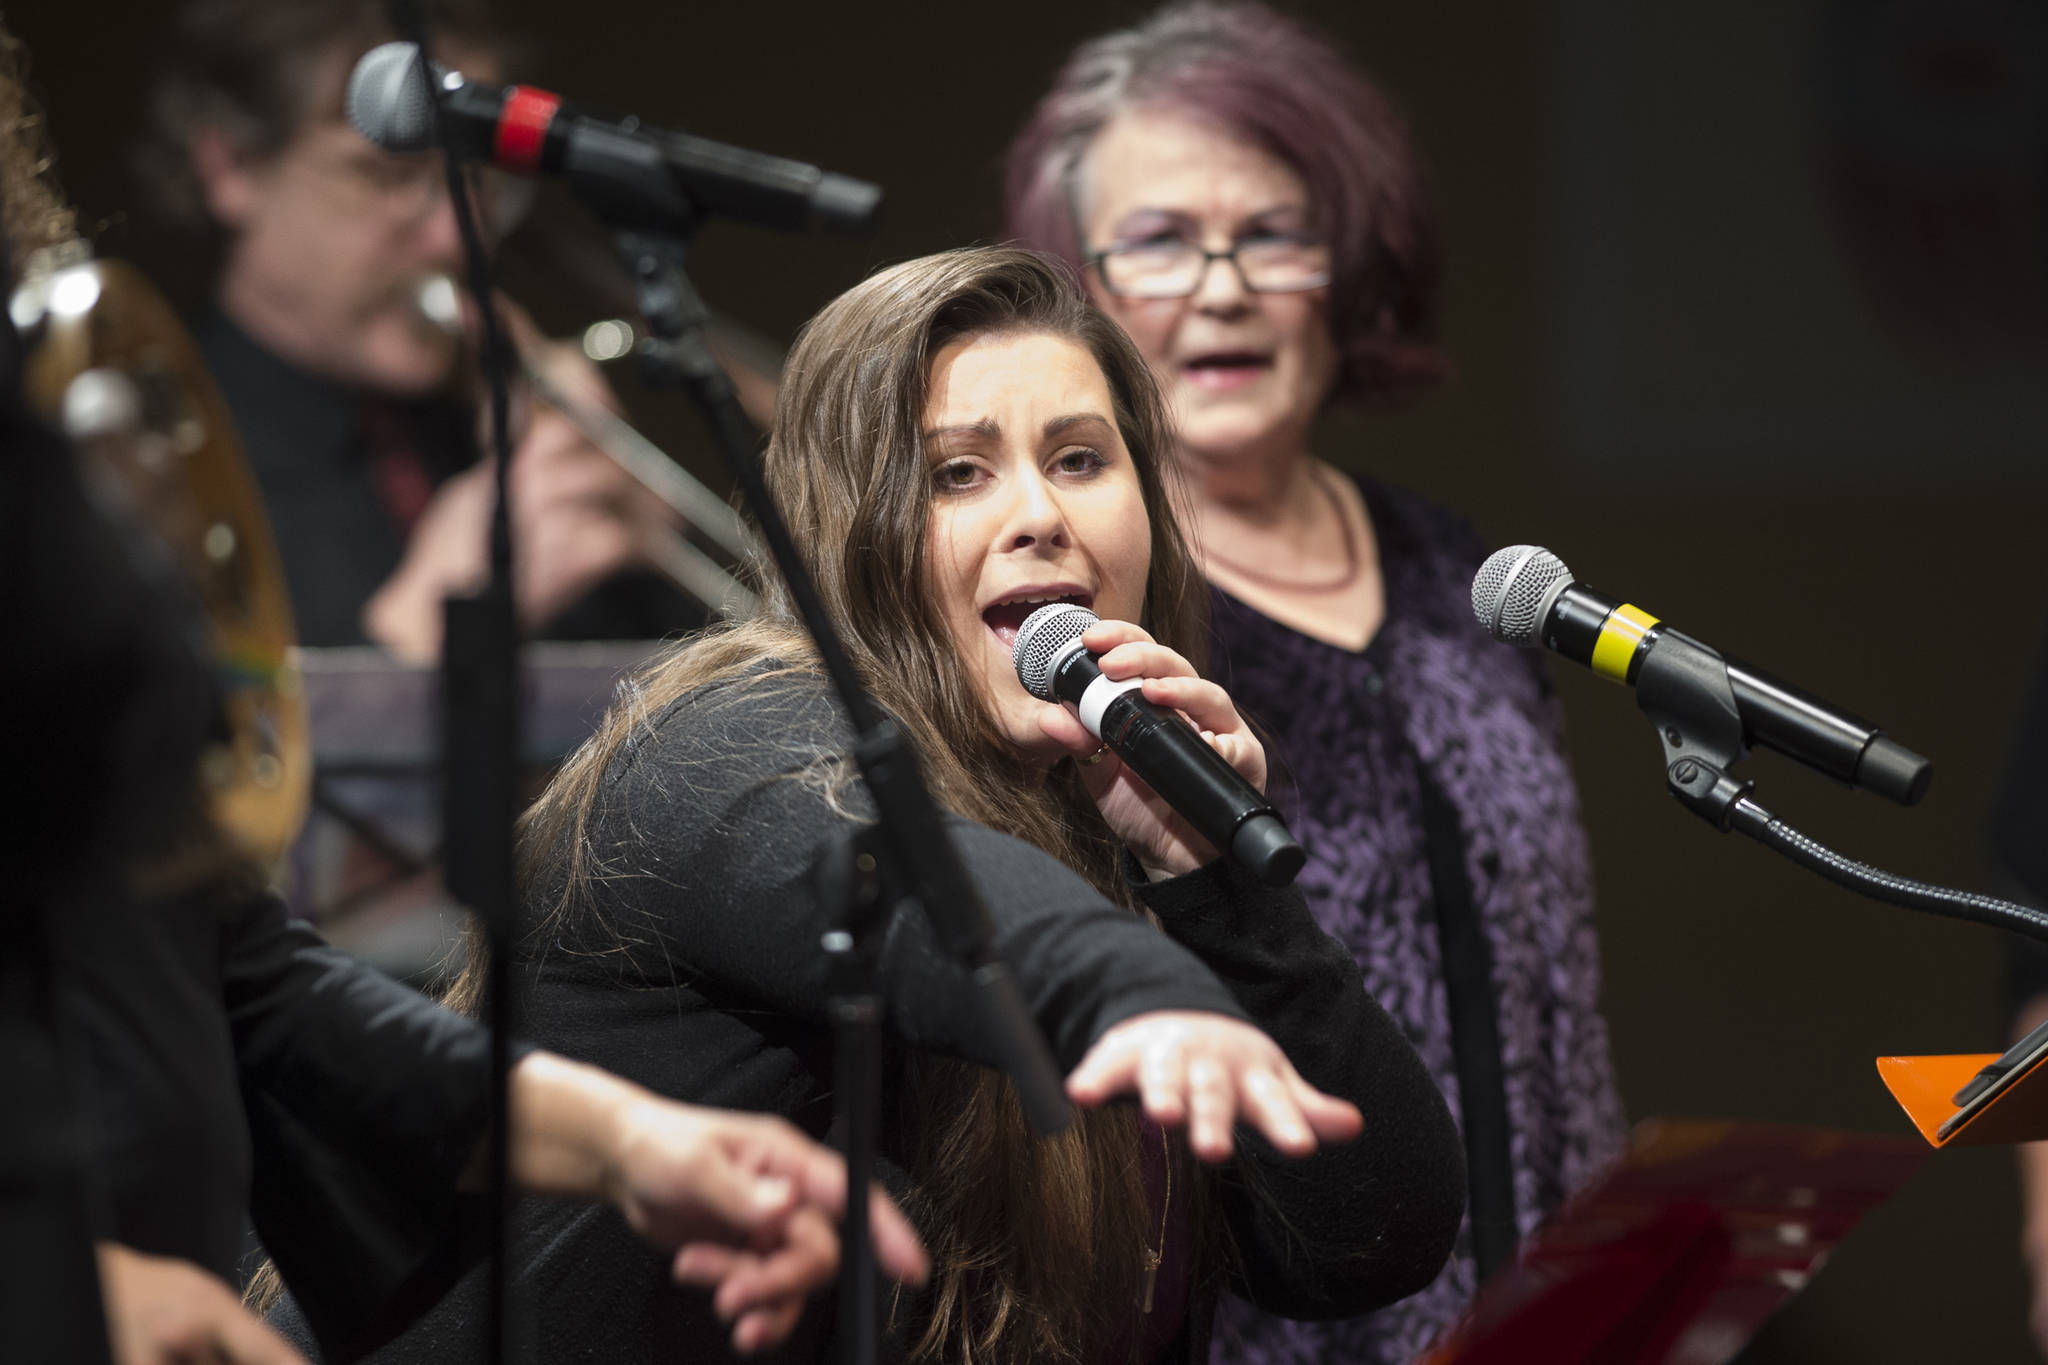 Alyssa Fischer, center, sings during a performance of “Motown for Our Town” featuring Ryan Shaw, Bobby Lewis, Eustace Johnson, Jaunelle Celaire others at the Juneau Arts & Culture Center on Friday, March 1, 2019. (Michael Penn | Juneau Empire)